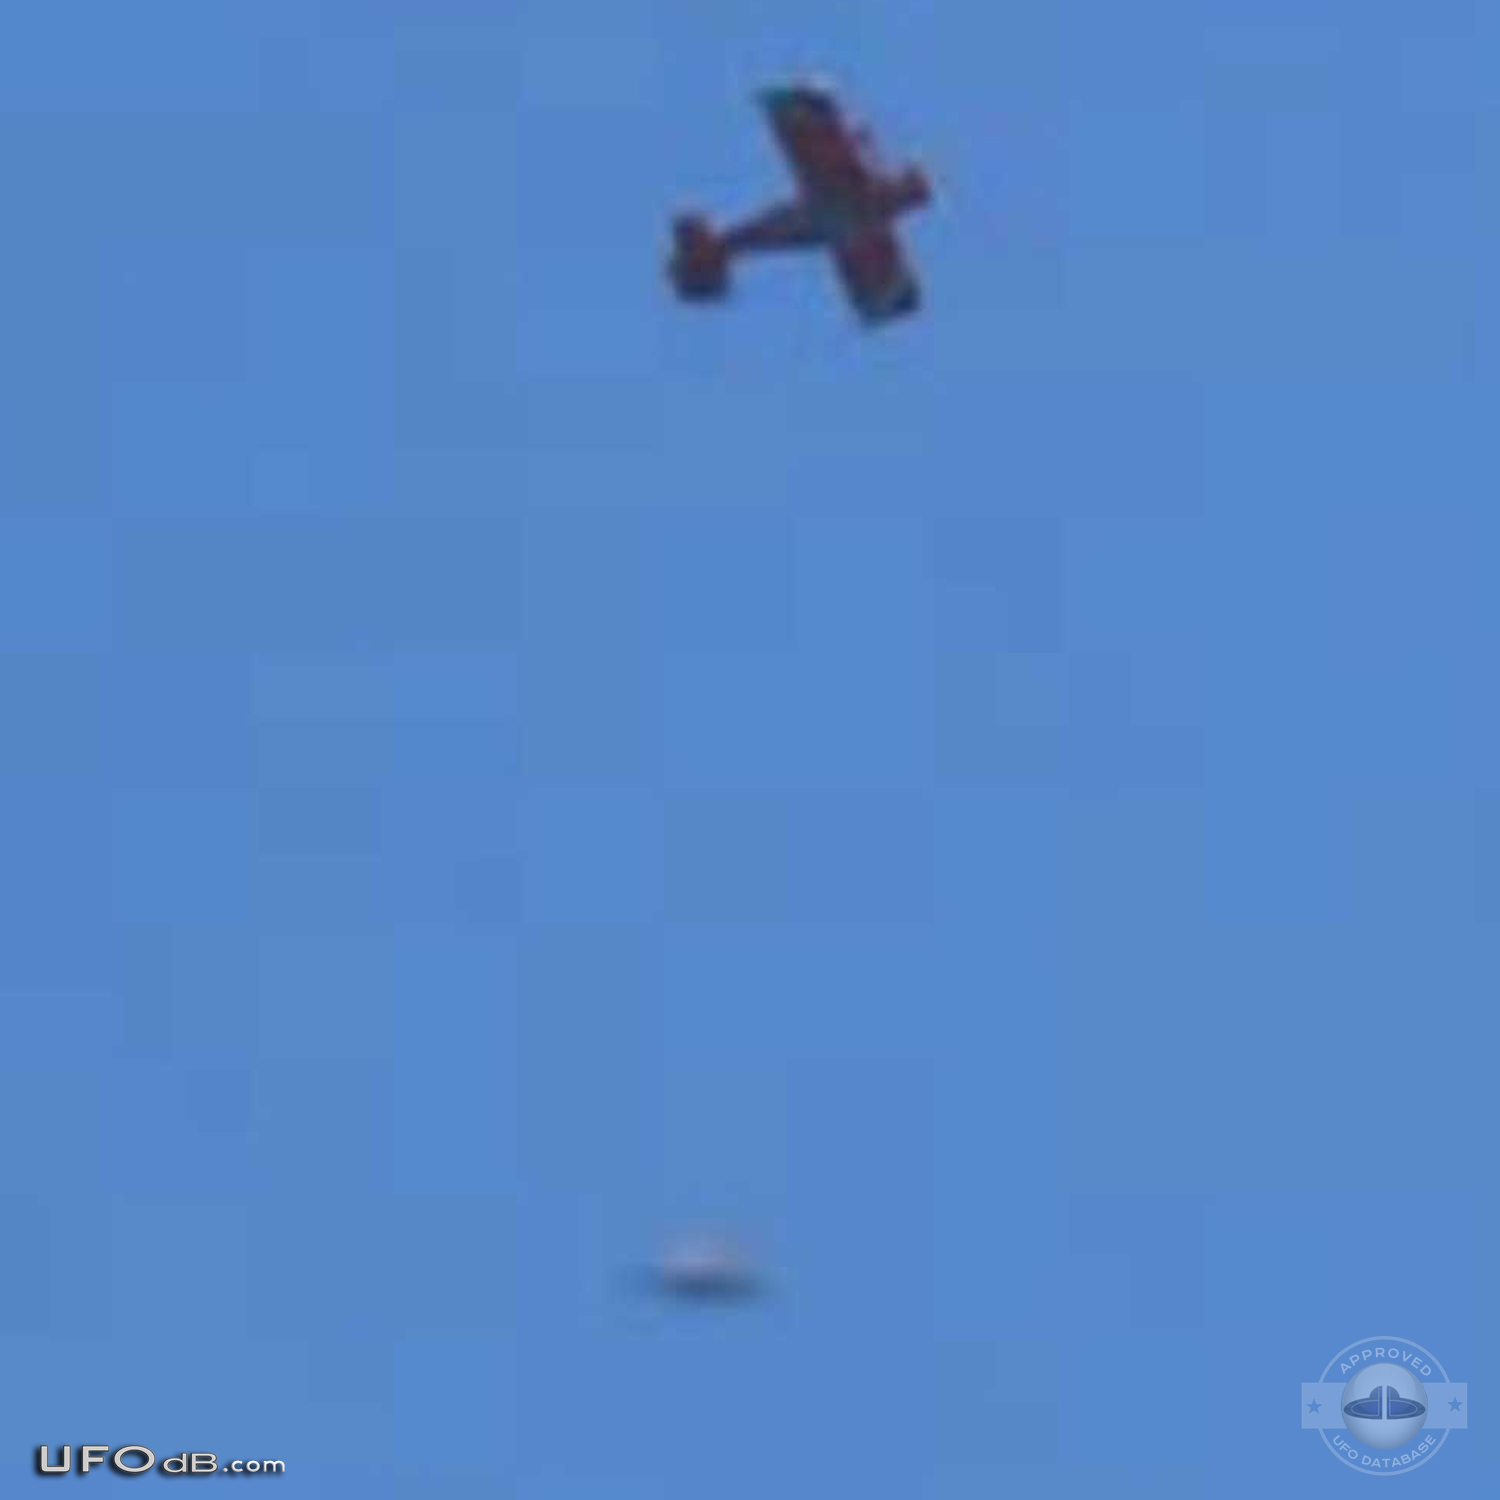 In Cape Town, South Africa a man get picture of UFO near Airplane 2011 UFO Picture #386-2